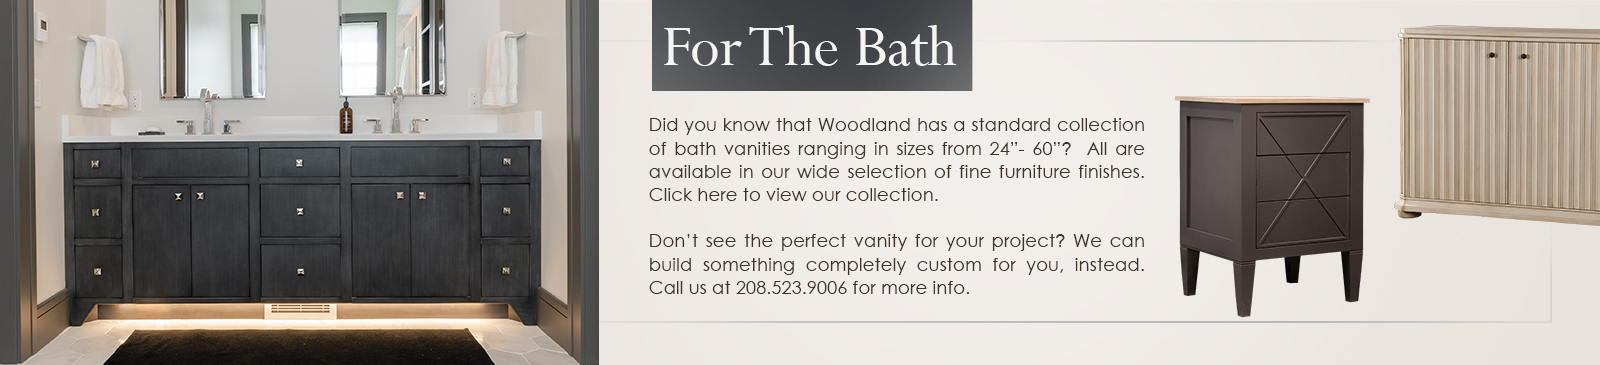 Contemporary to transitional standard or Custom Bathroom Vanities by Woodland furniture in Idaho Falls Idaho. Made in the USA